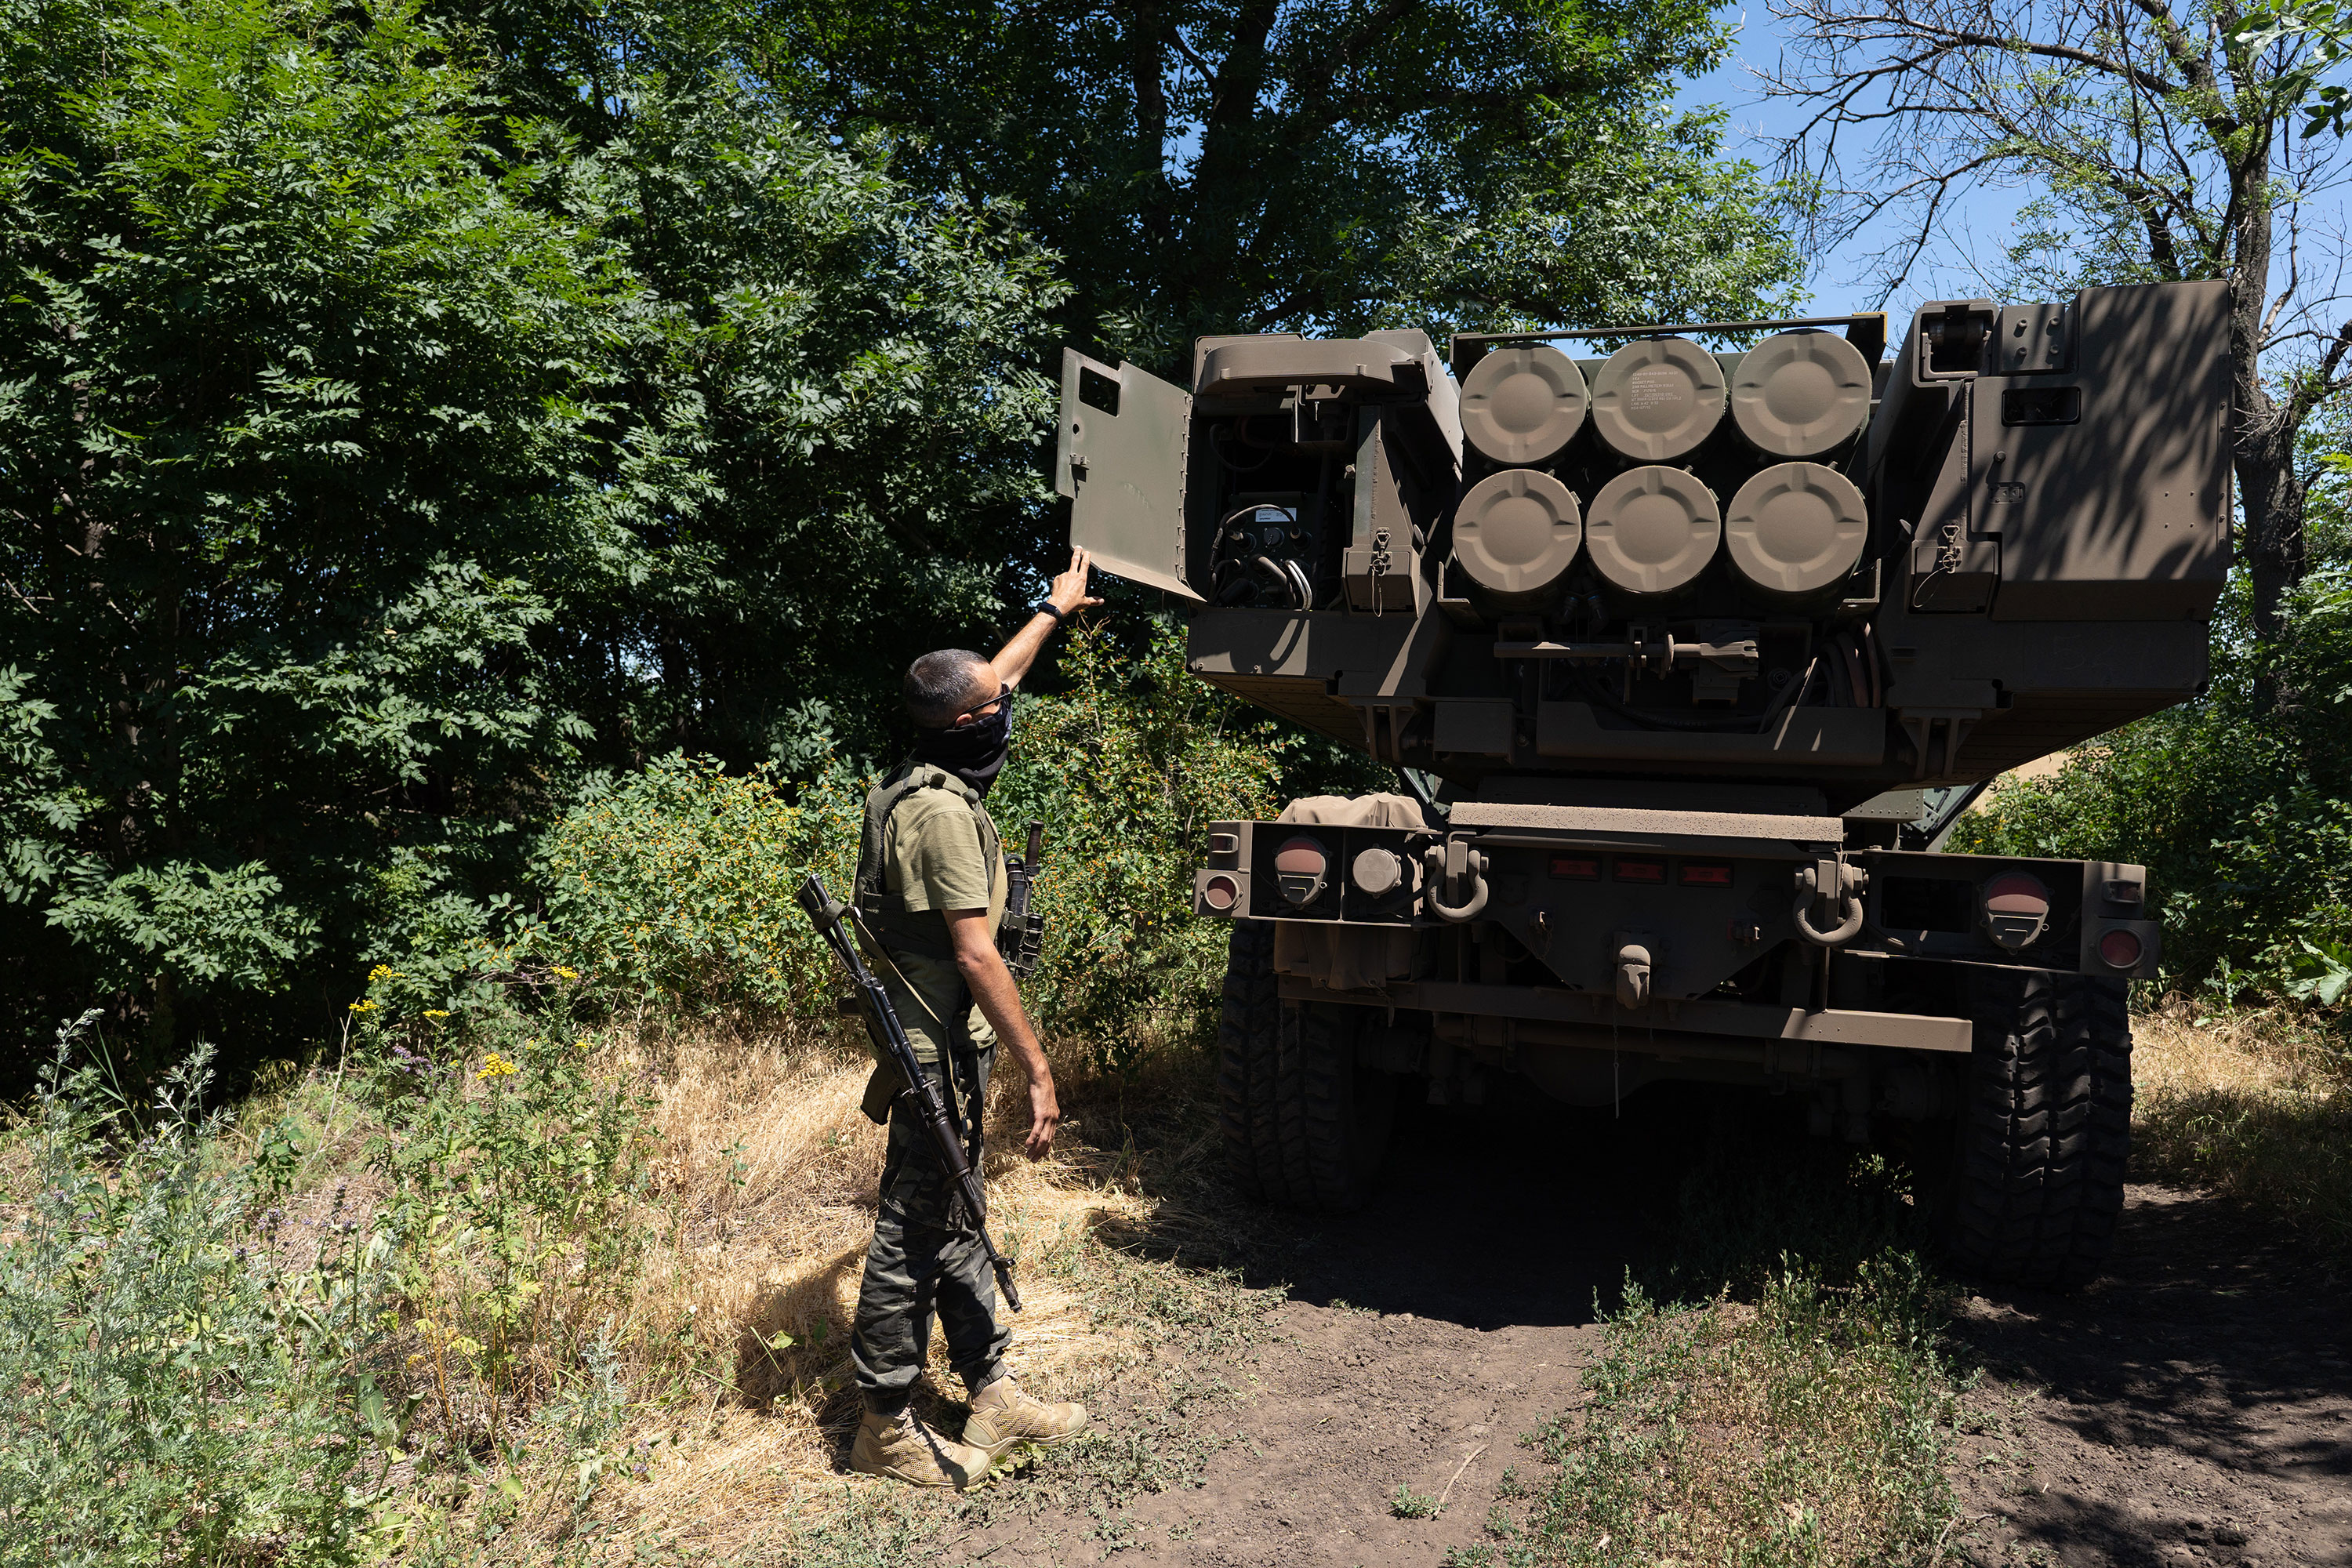 A Ukrainian commander shows the rockets of a HIMARS vehicle in Ukraine on July 1.